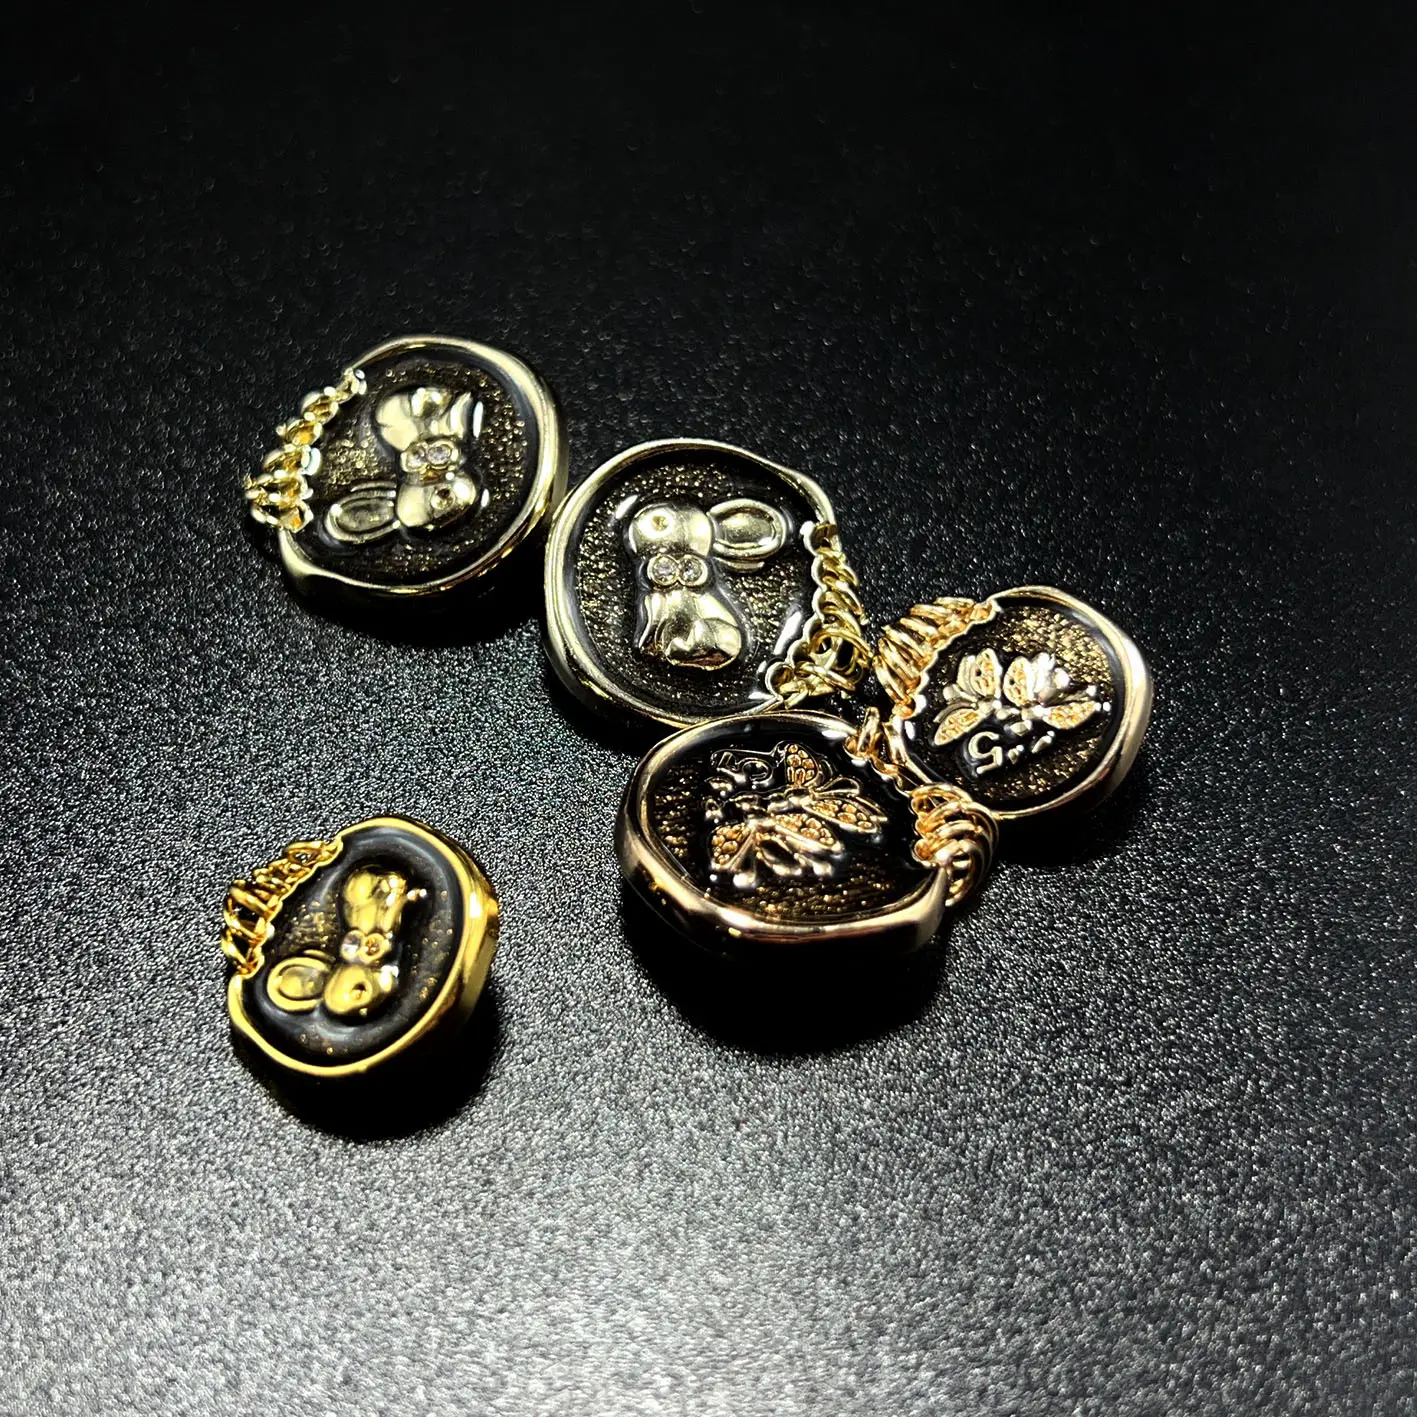 Wholesale High-End Ladies Custom Buttons Decorated with Metallic Surfaces and Bee-Patterned Hoops